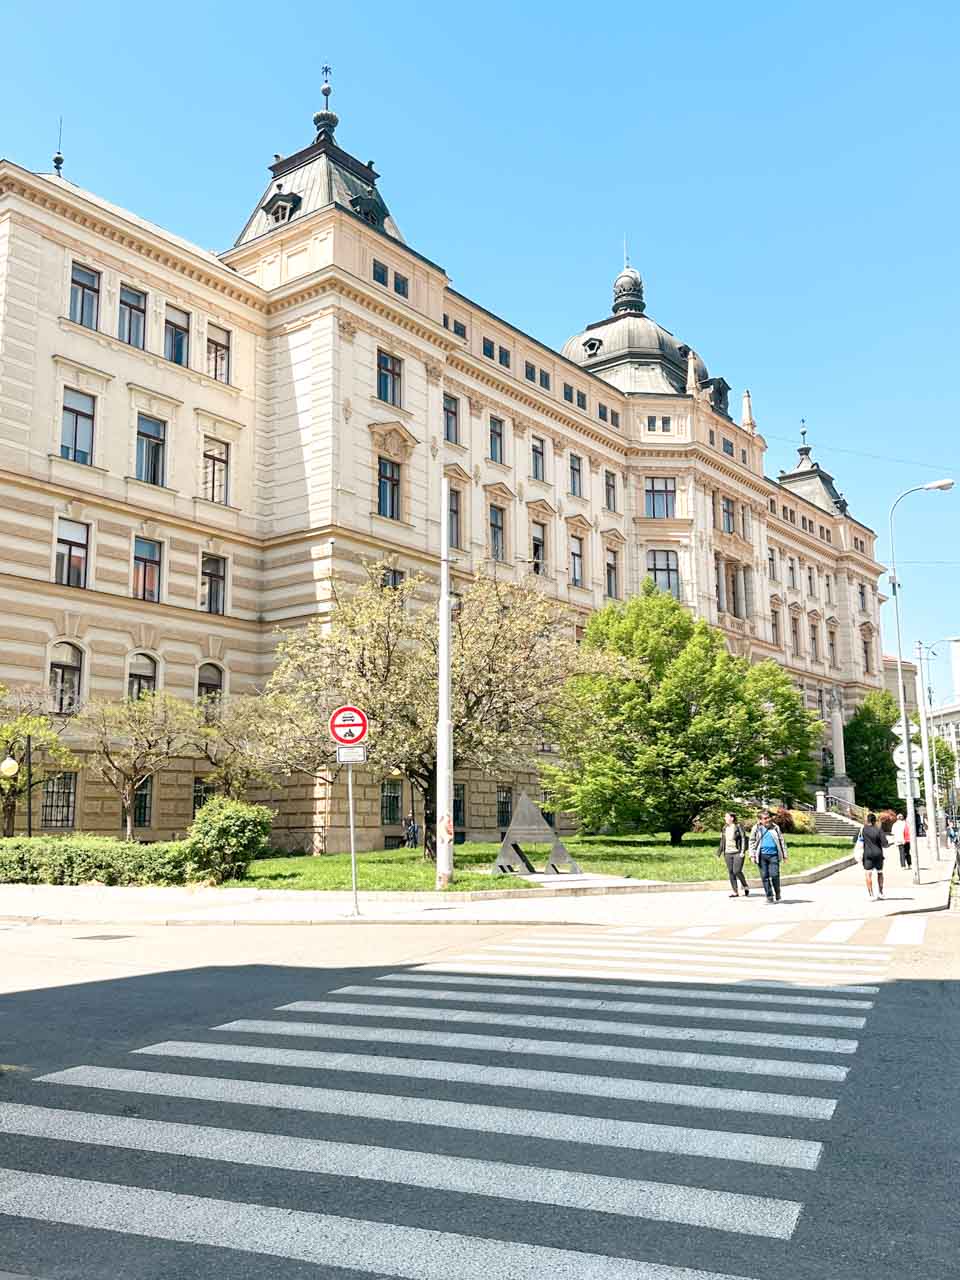 The Regional Court in Brno, Czech Republic on a sunny day